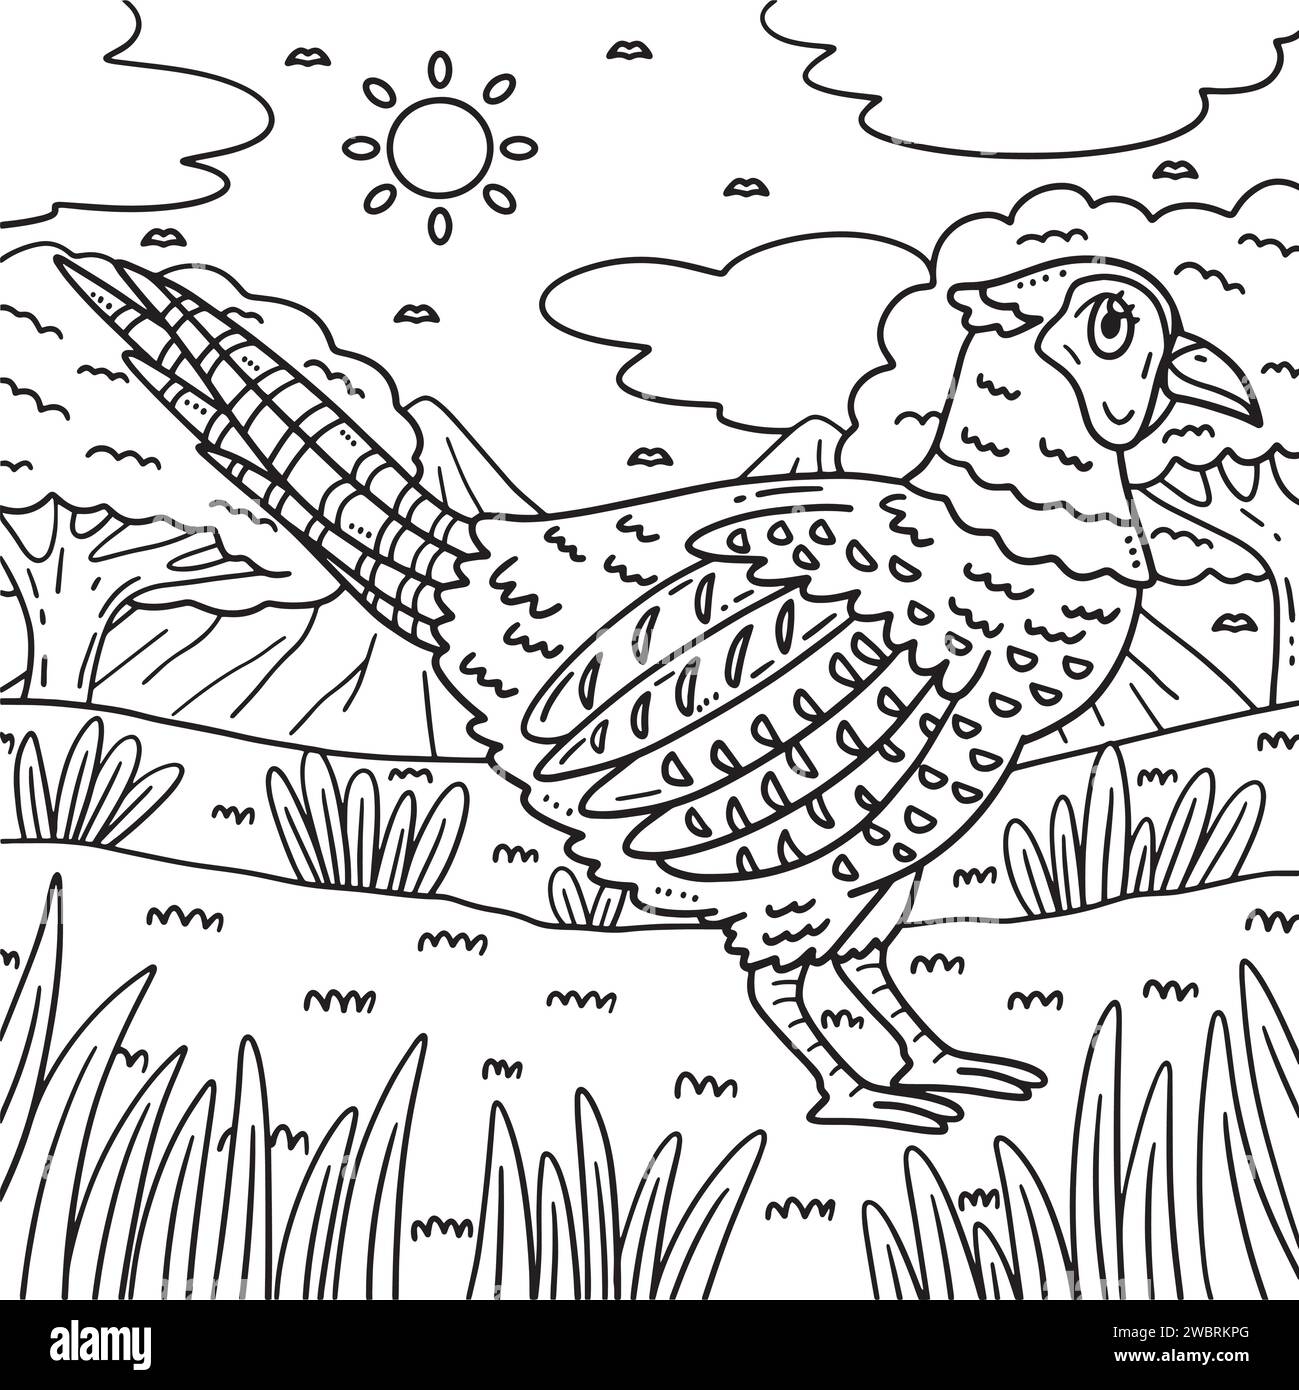 Common Pheasant Bird Coloring Page for Kids Stock Vector